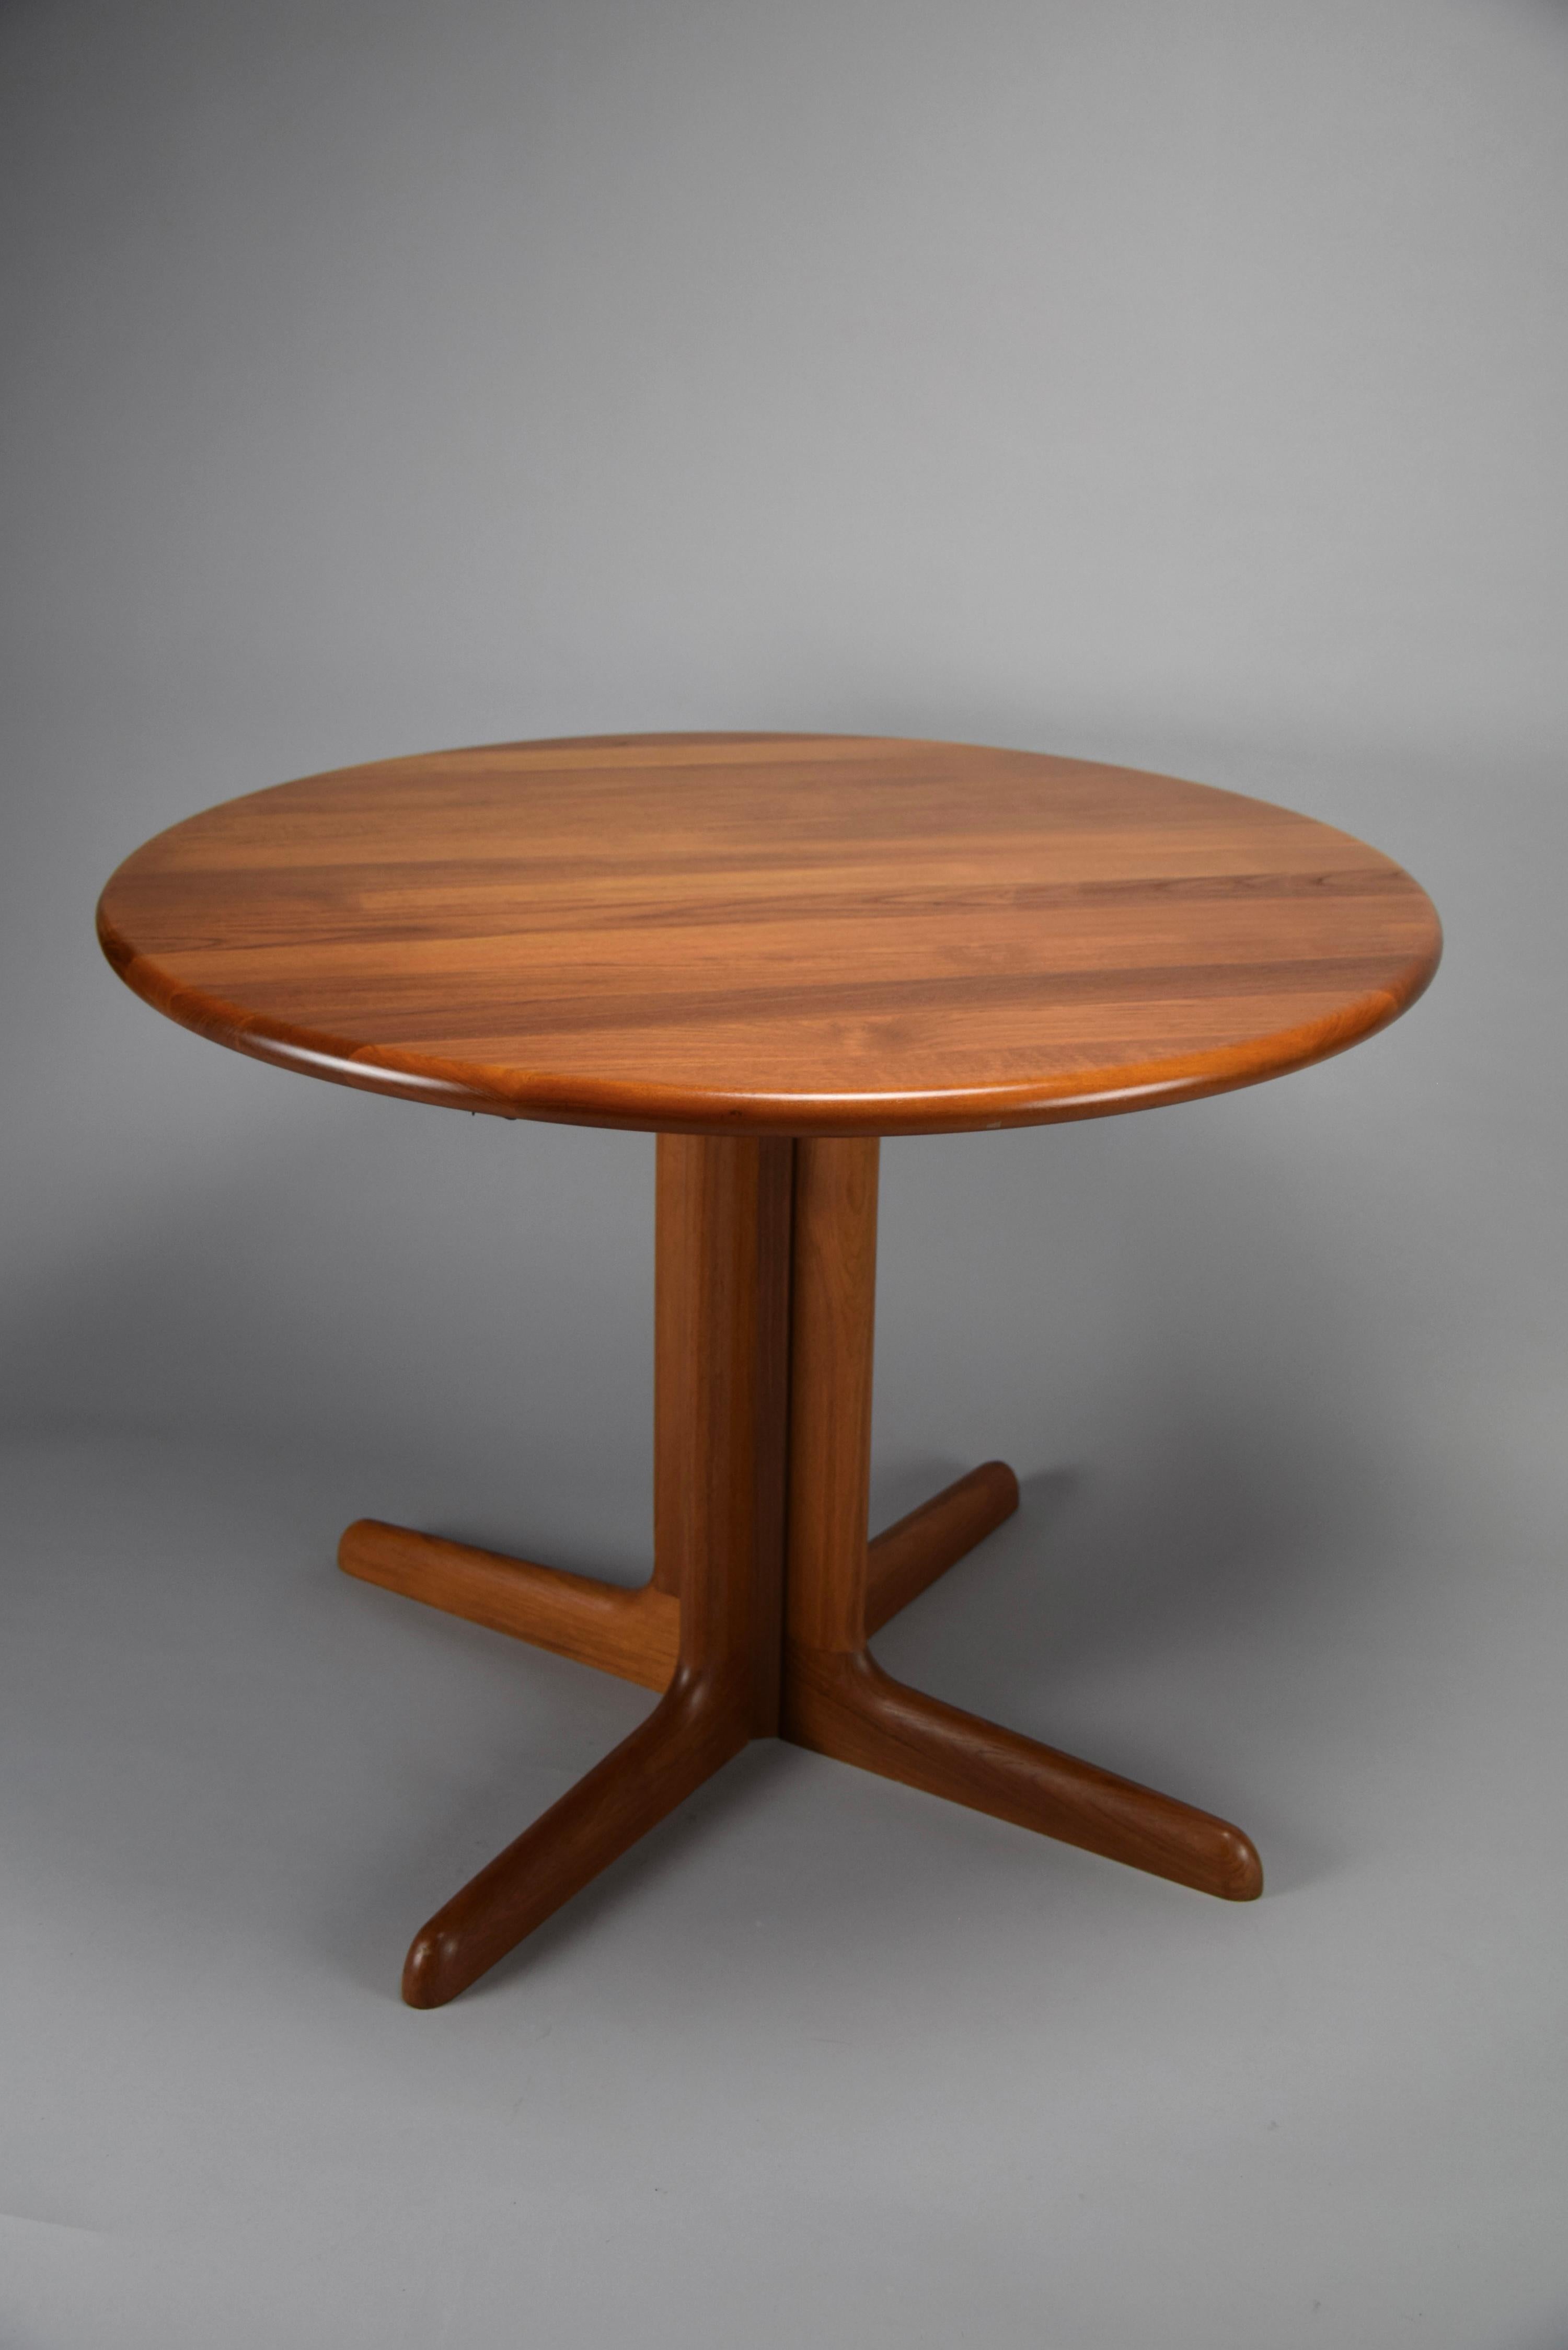 Introducing the Mid-Century Modern Elegance: Niels Otto Møller's Jatoba Wood Dining Table

Elevate your dining experience with the timeless beauty of this mid-century modern solid Jatoba wood extendable dining table, meticulously designed by Niels